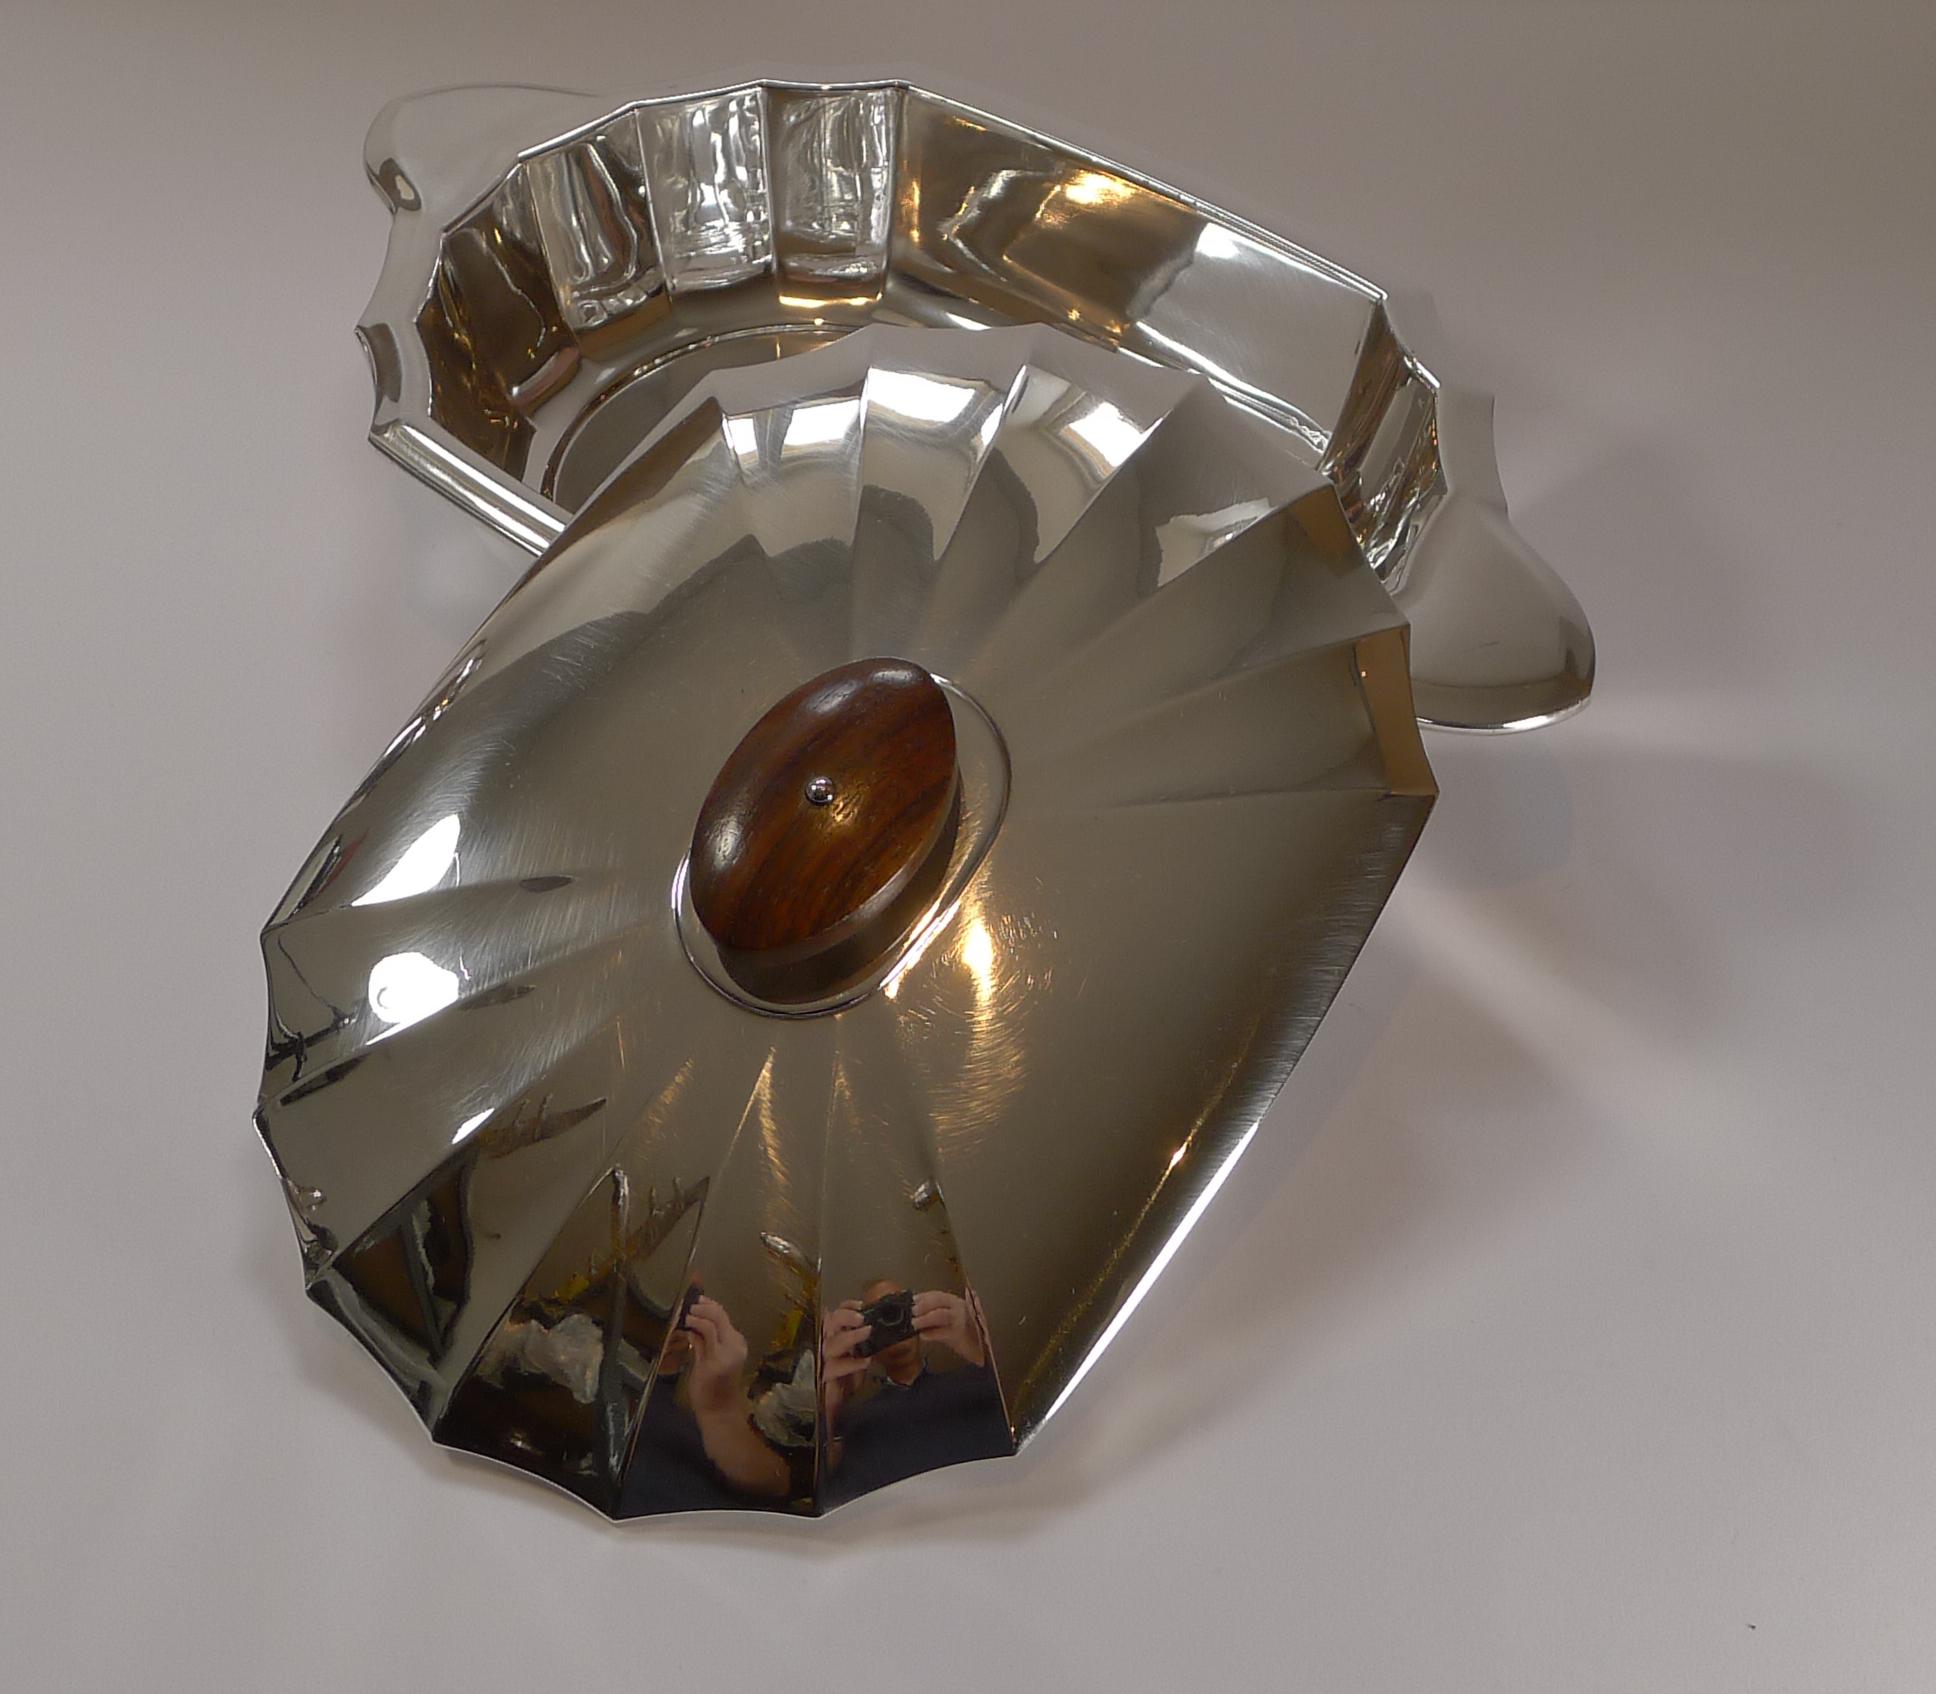 Mid-20th Century French Art Deco Christofle / Gallia Covered Serving Dish, c. 1930 For Sale